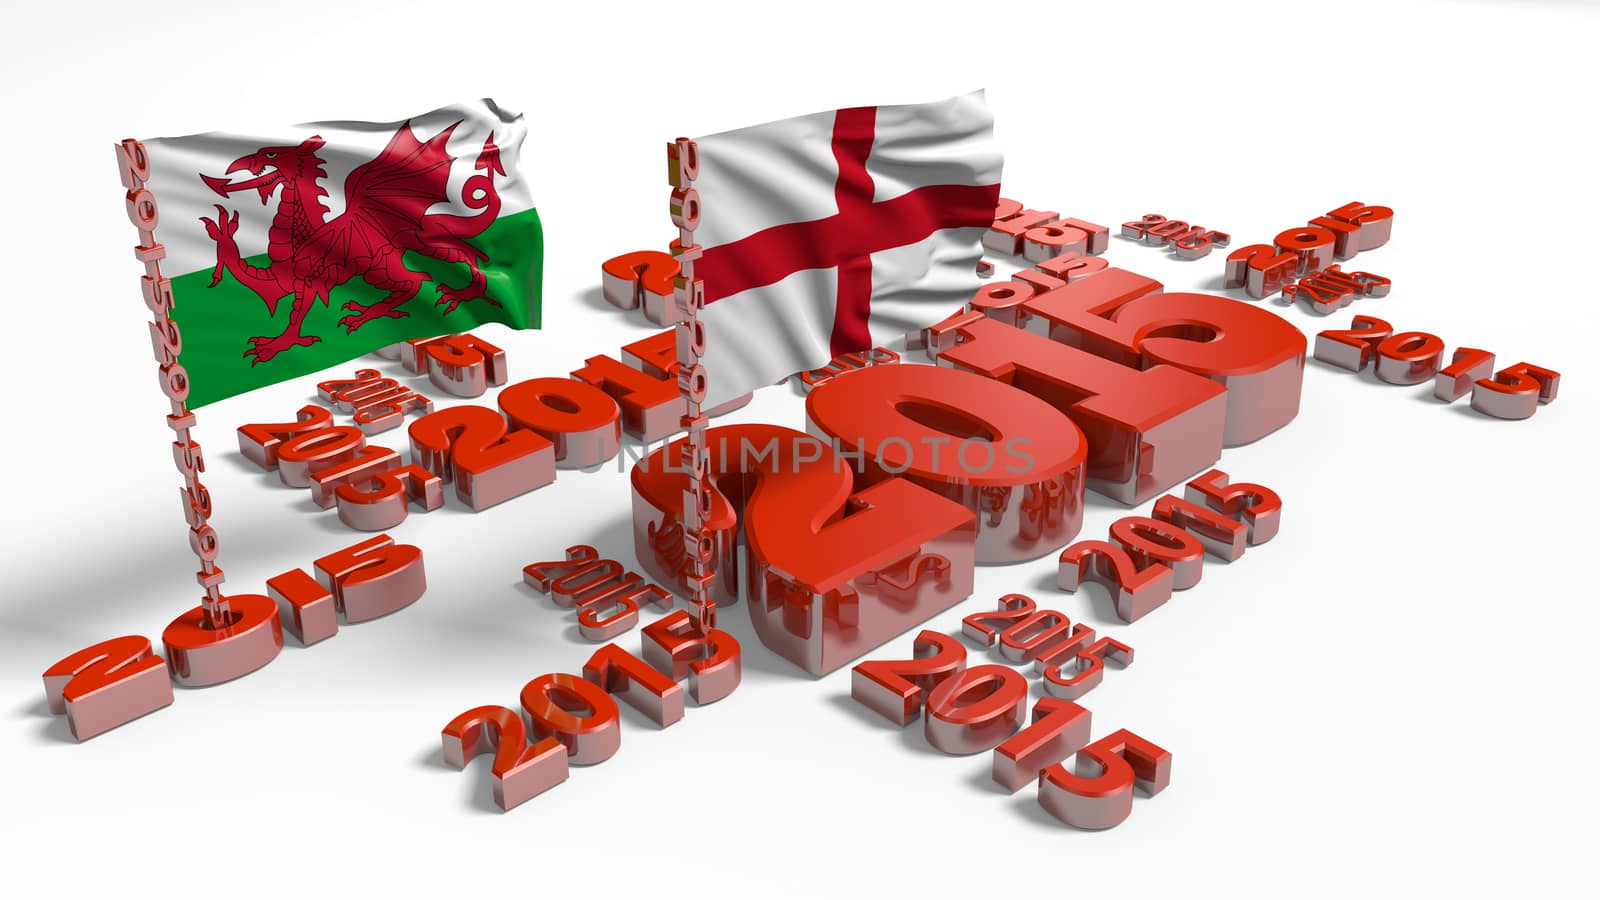 2015 England and Wales Flags by shkyo30